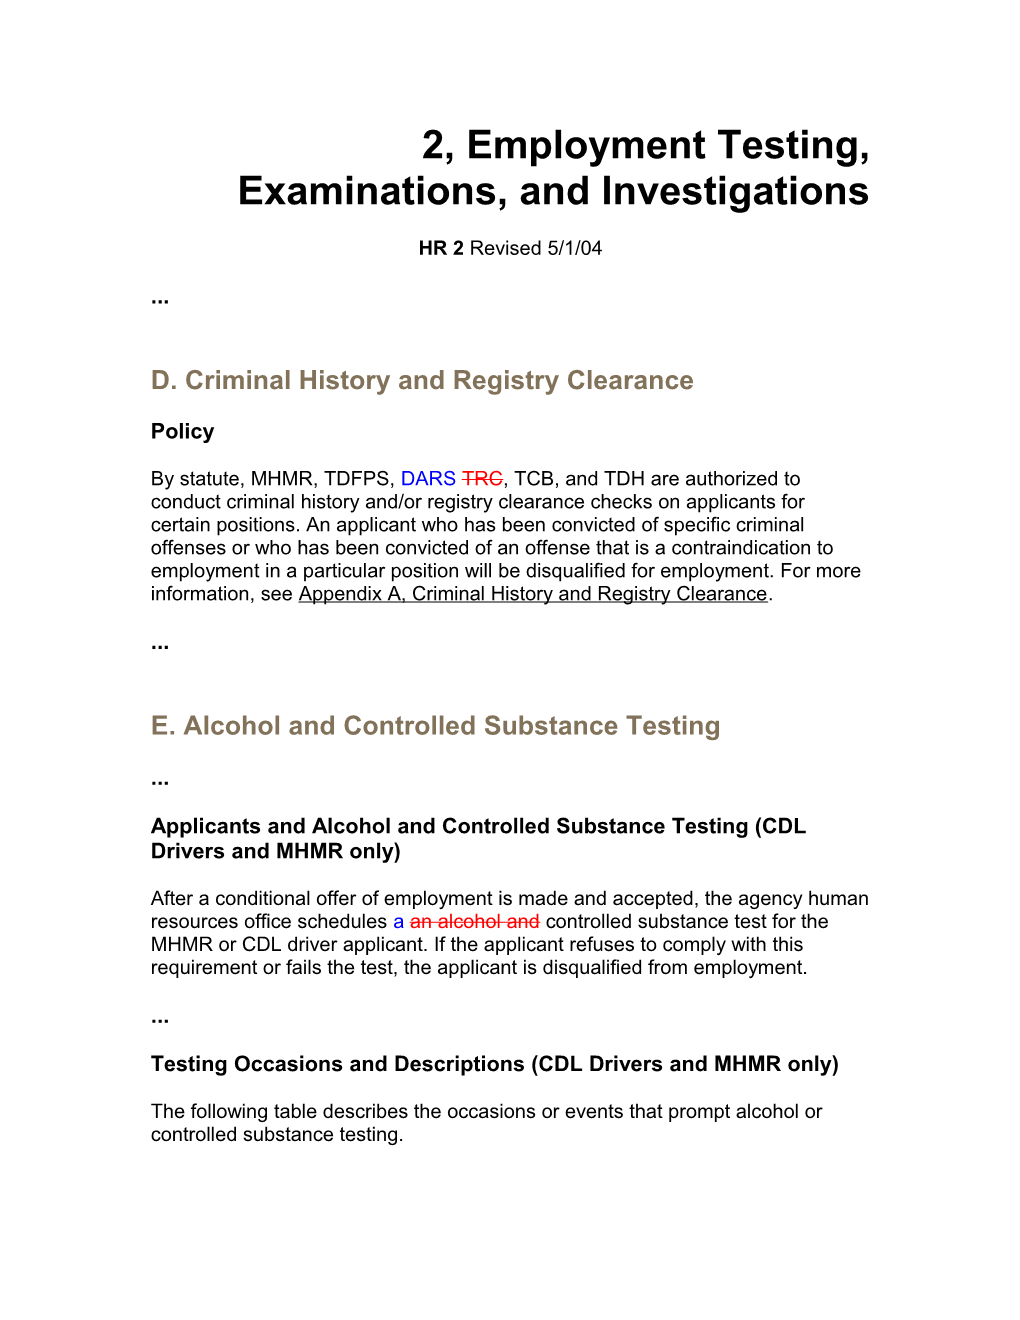 2, Employment Testing, Examinations, and Investigations